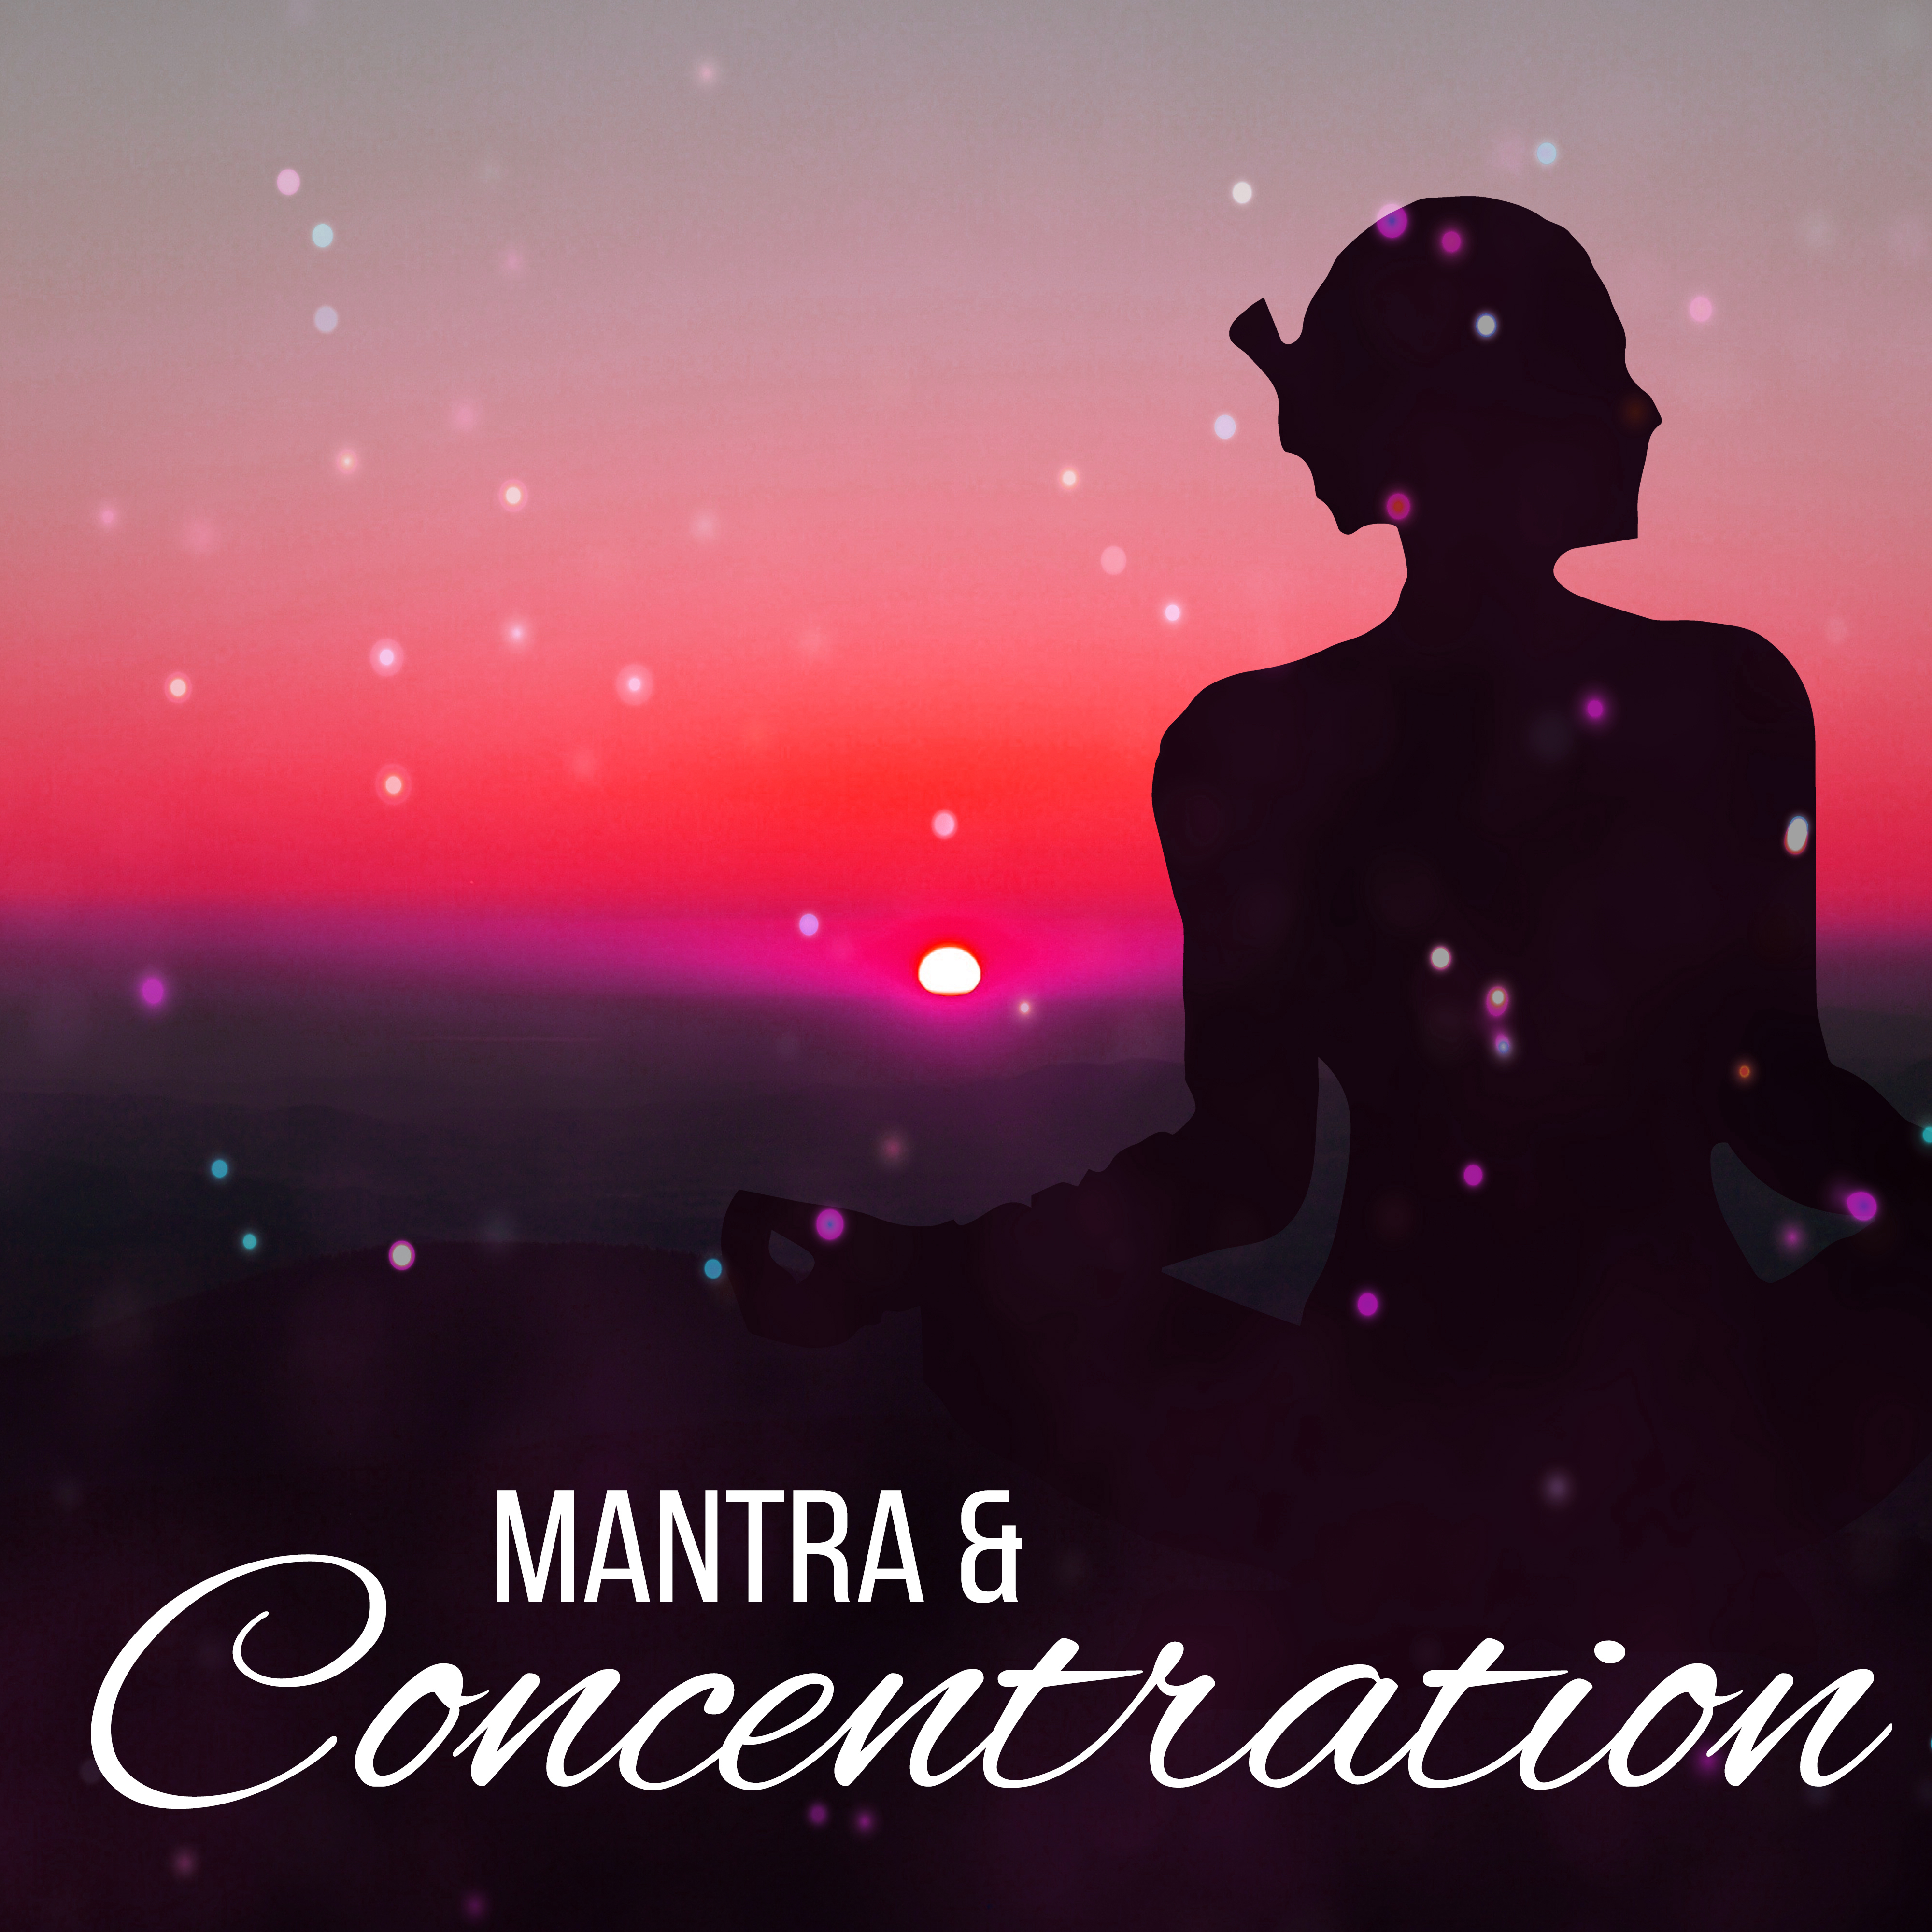 Mantra & Concentration – Zen Music, Pure Relaxation, Meditation Music, Sounds of Yoga, Nature Sounds, Inner Spirit, Flute Music, Yoga Meditation